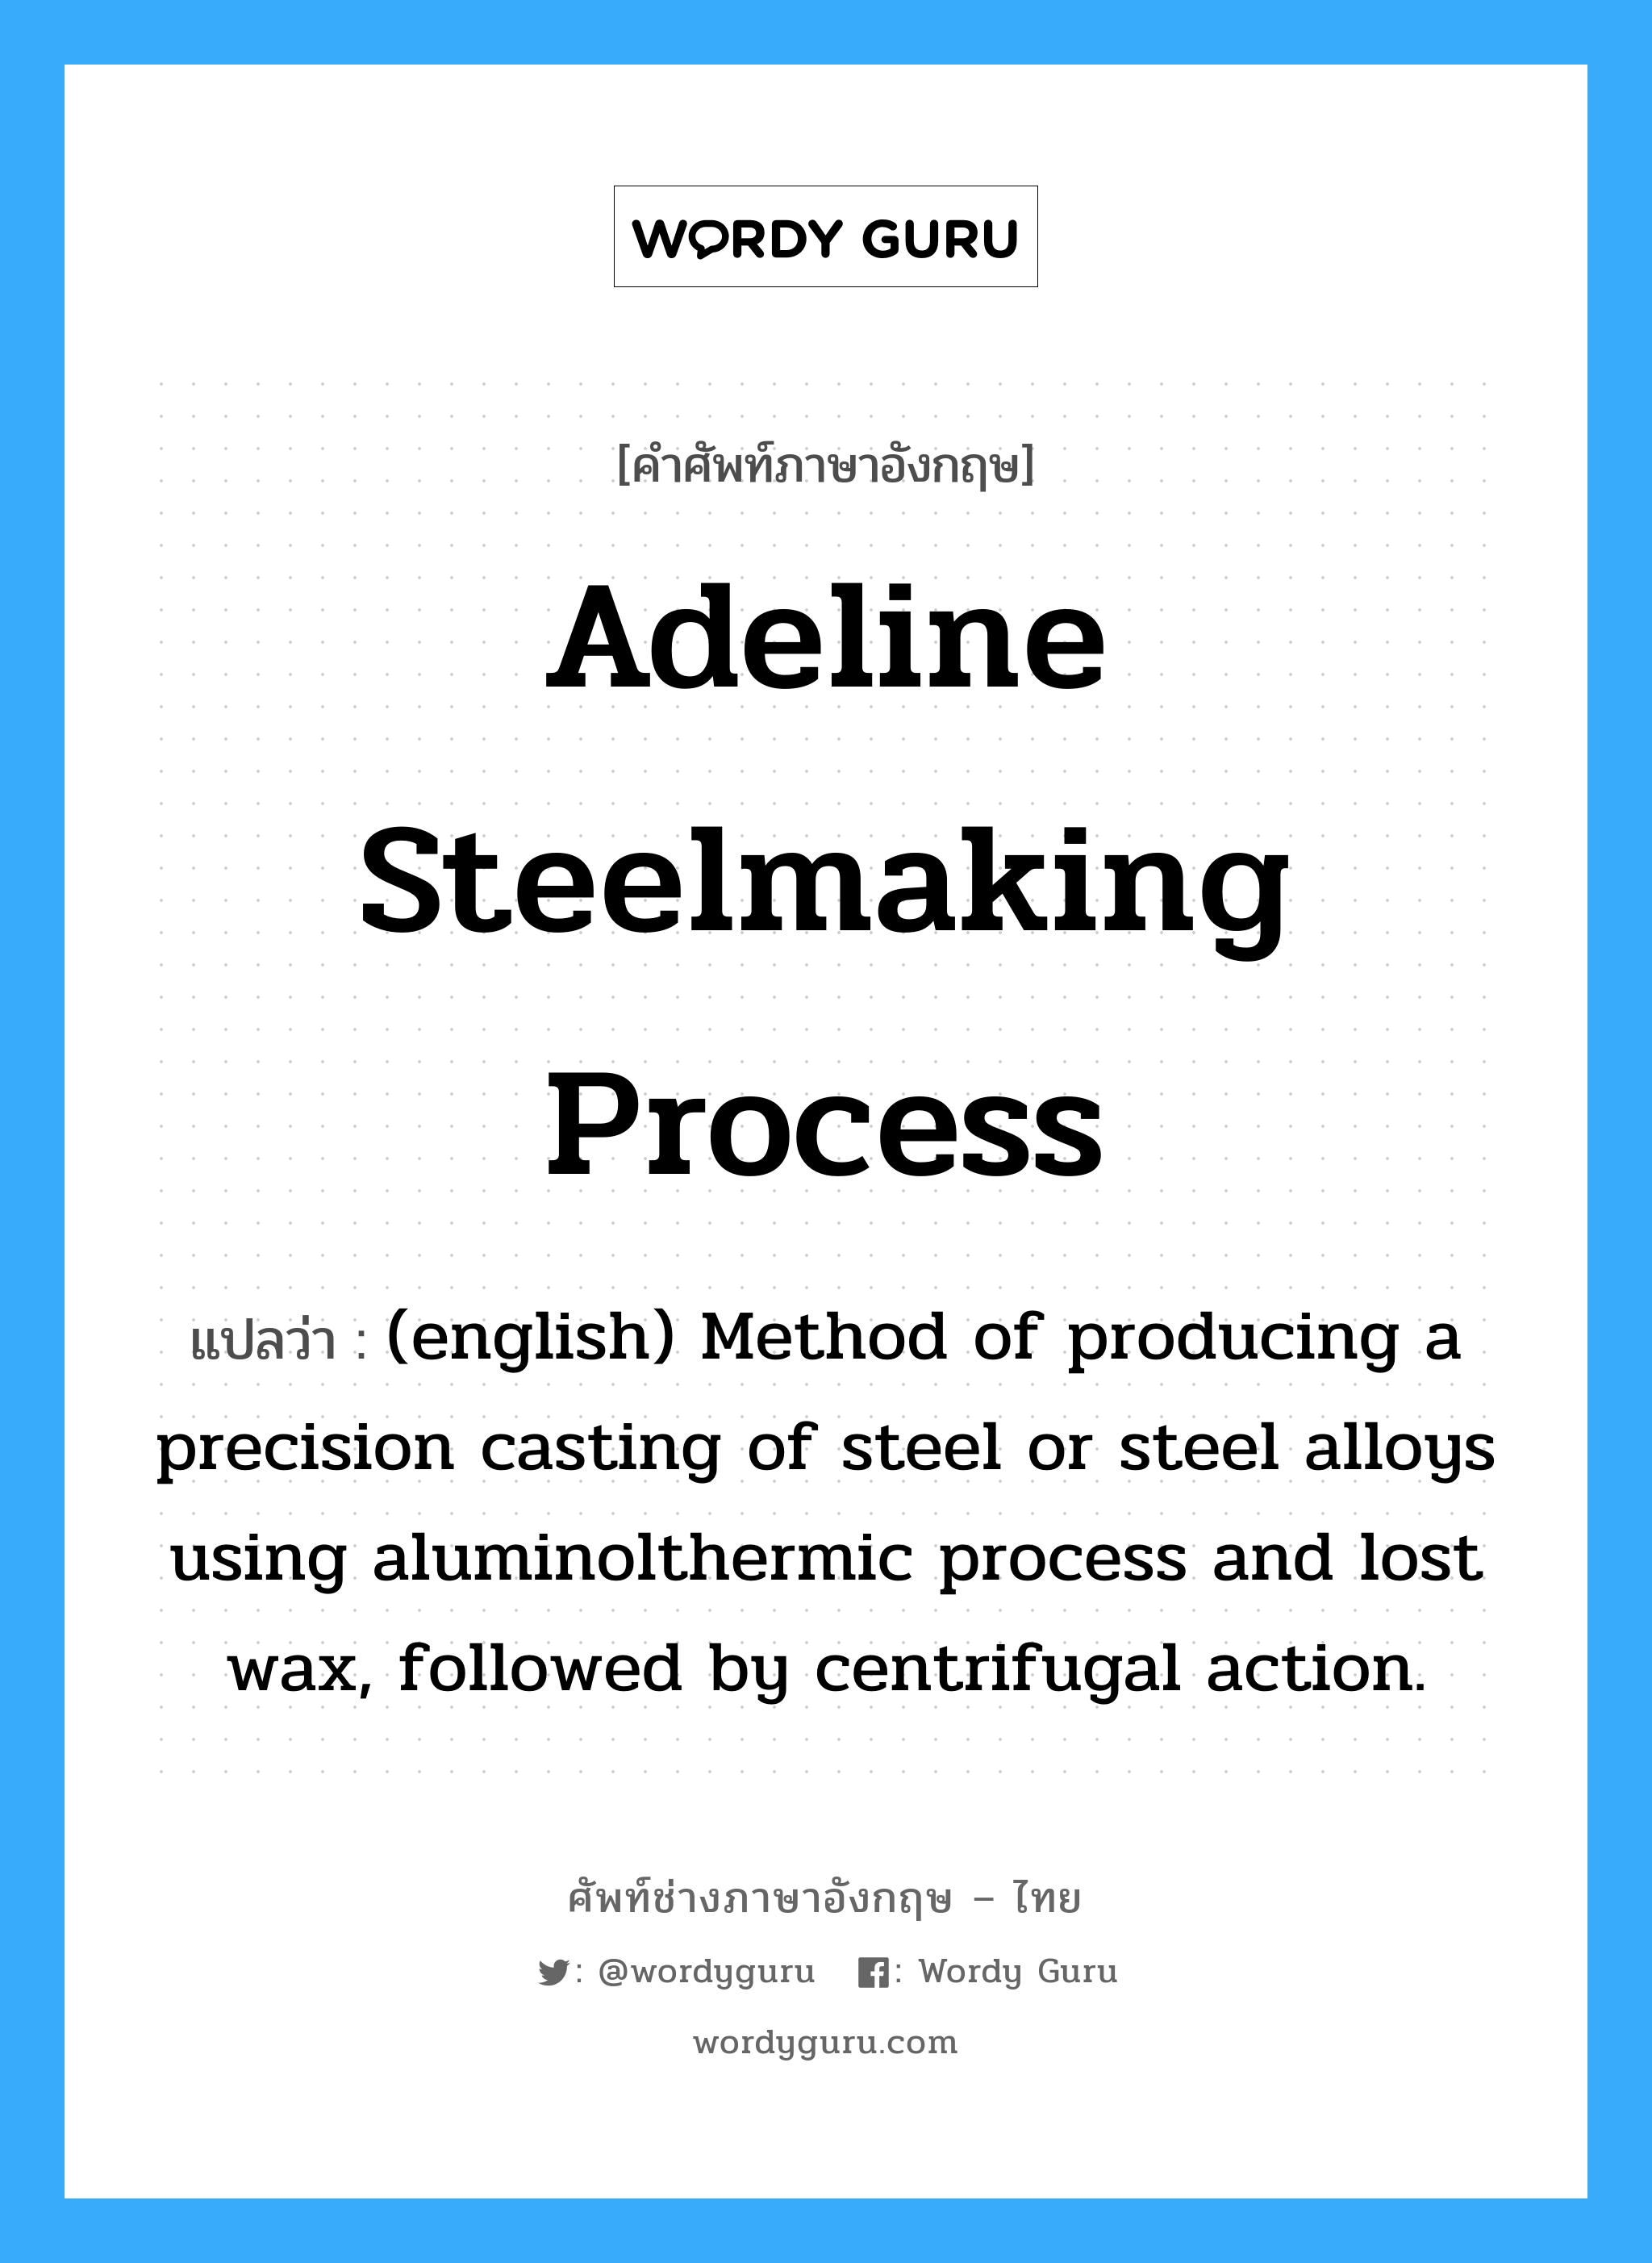 (english) Method of producing a precision casting of steel or steel alloys using aluminolthermic process and lost wax, followed by centrifugal action. ภาษาอังกฤษ?, คำศัพท์ช่างภาษาอังกฤษ - ไทย (english) Method of producing a precision casting of steel or steel alloys using aluminolthermic process and lost wax, followed by centrifugal action. คำศัพท์ภาษาอังกฤษ (english) Method of producing a precision casting of steel or steel alloys using aluminolthermic process and lost wax, followed by centrifugal action. แปลว่า Adeline Steelmaking Process